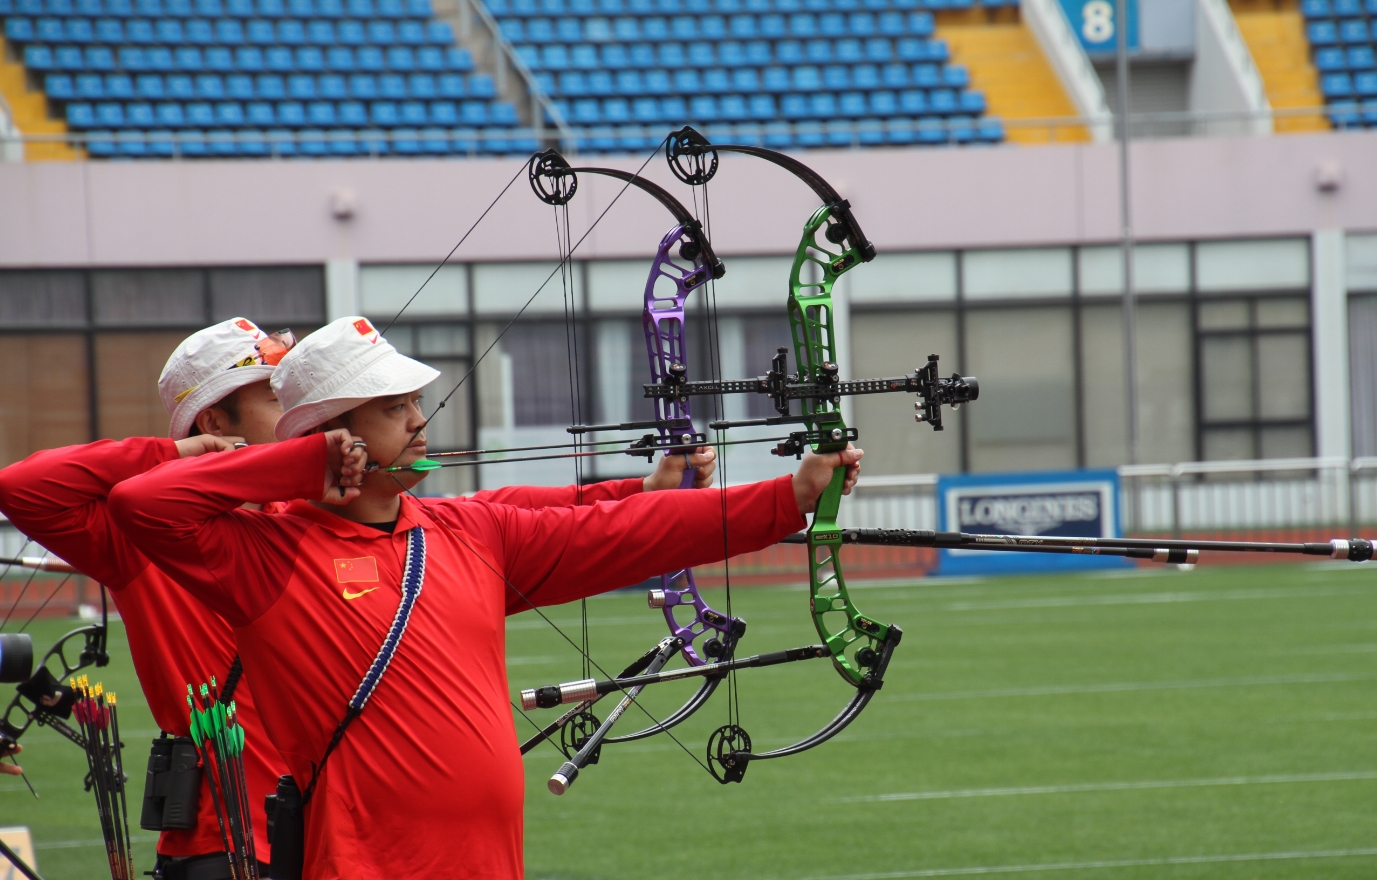 Chinese Archery nation team will use Hero X10 to attend World Cup 2020 Shanghai 